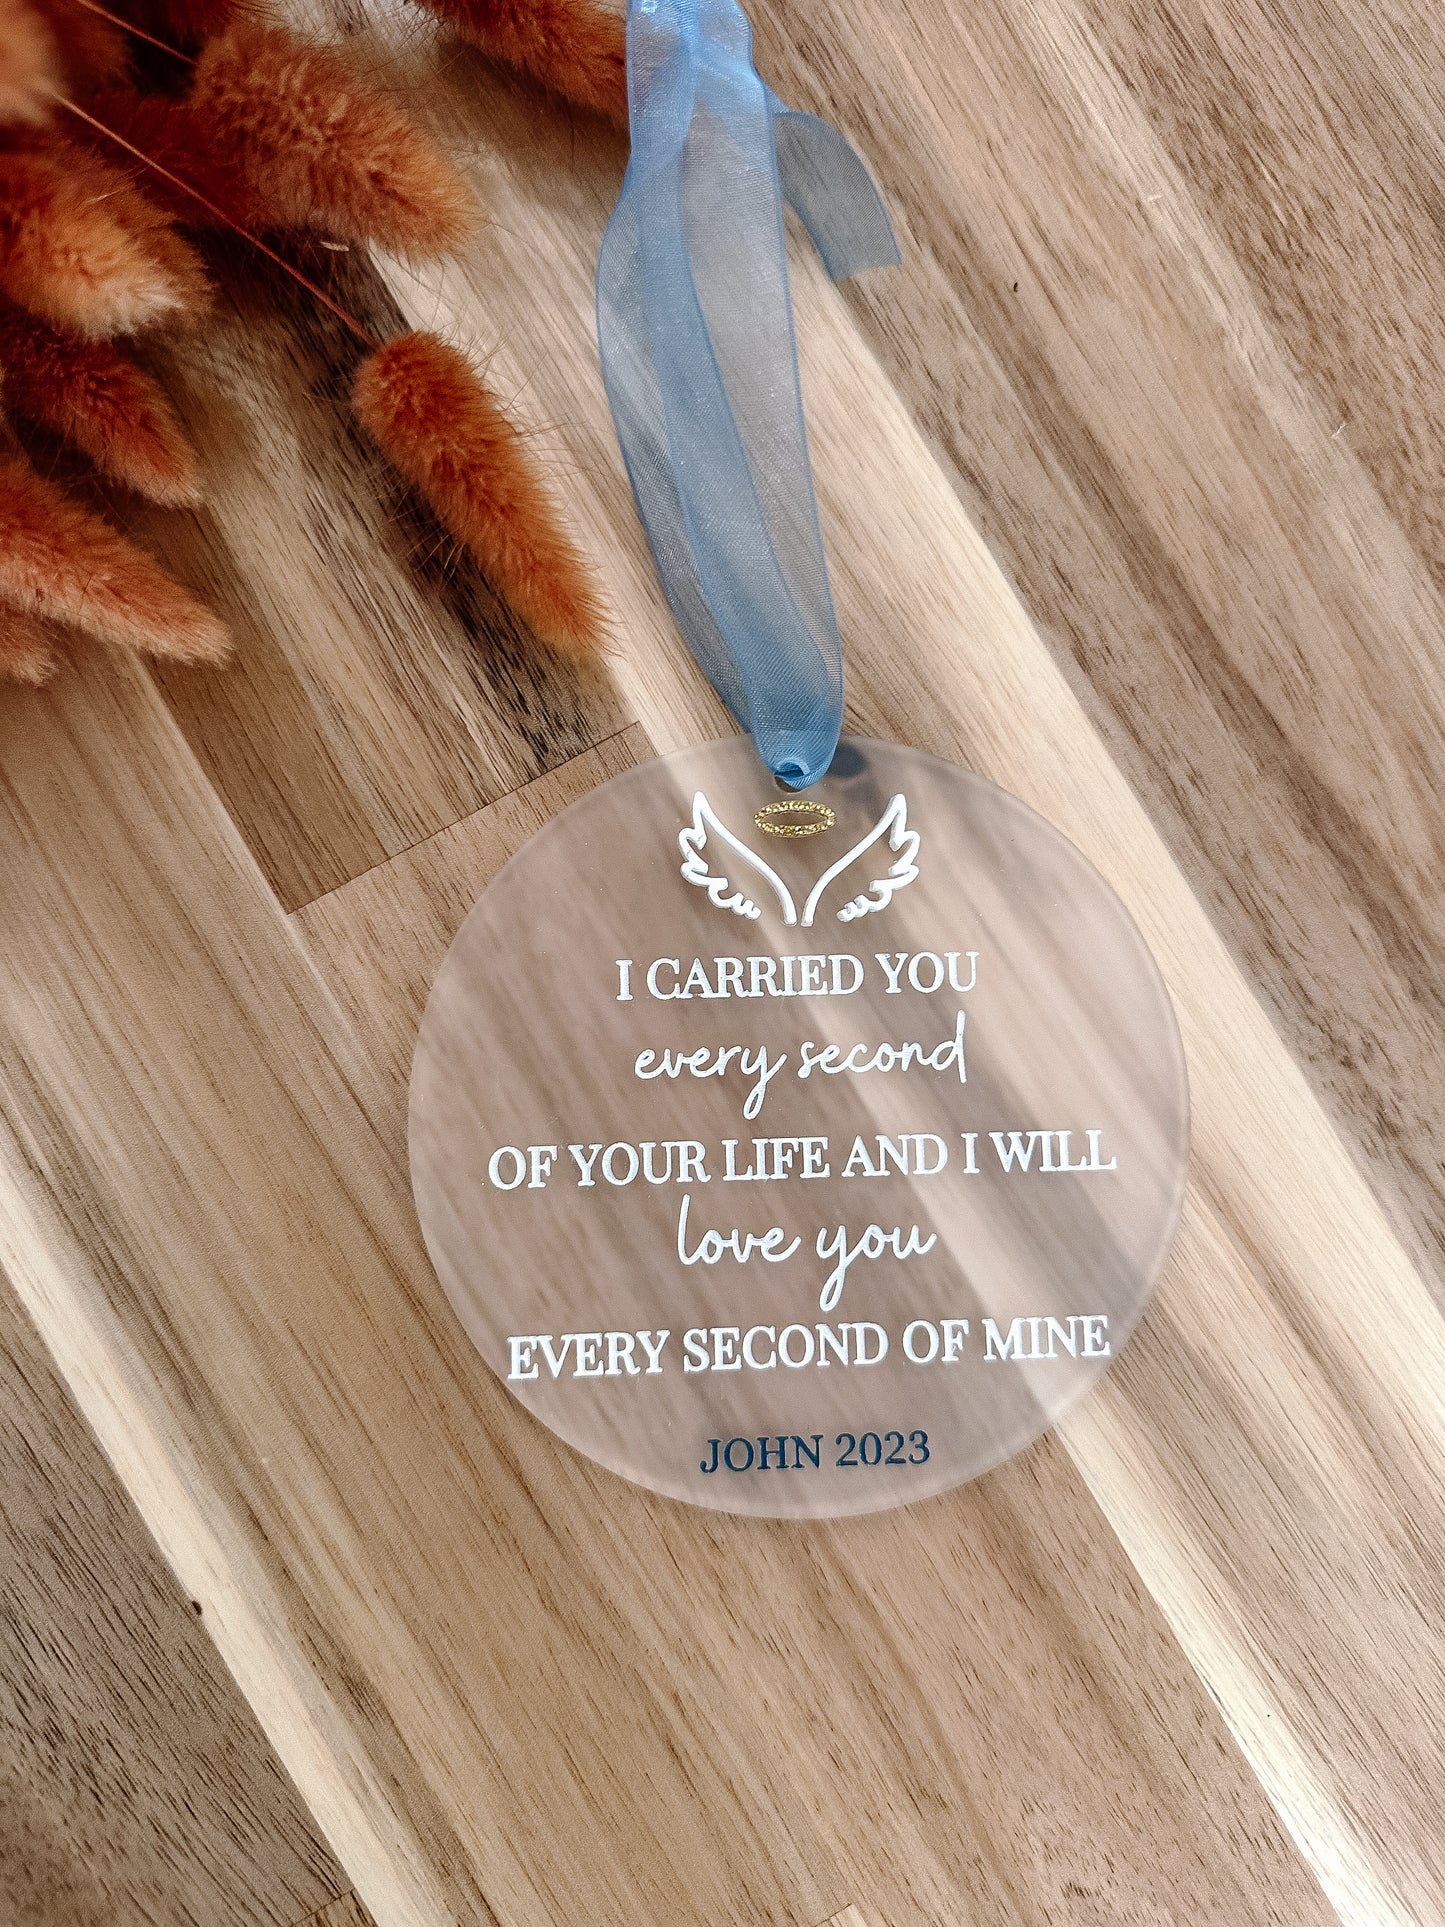 I carried you ever second baby angel ornament